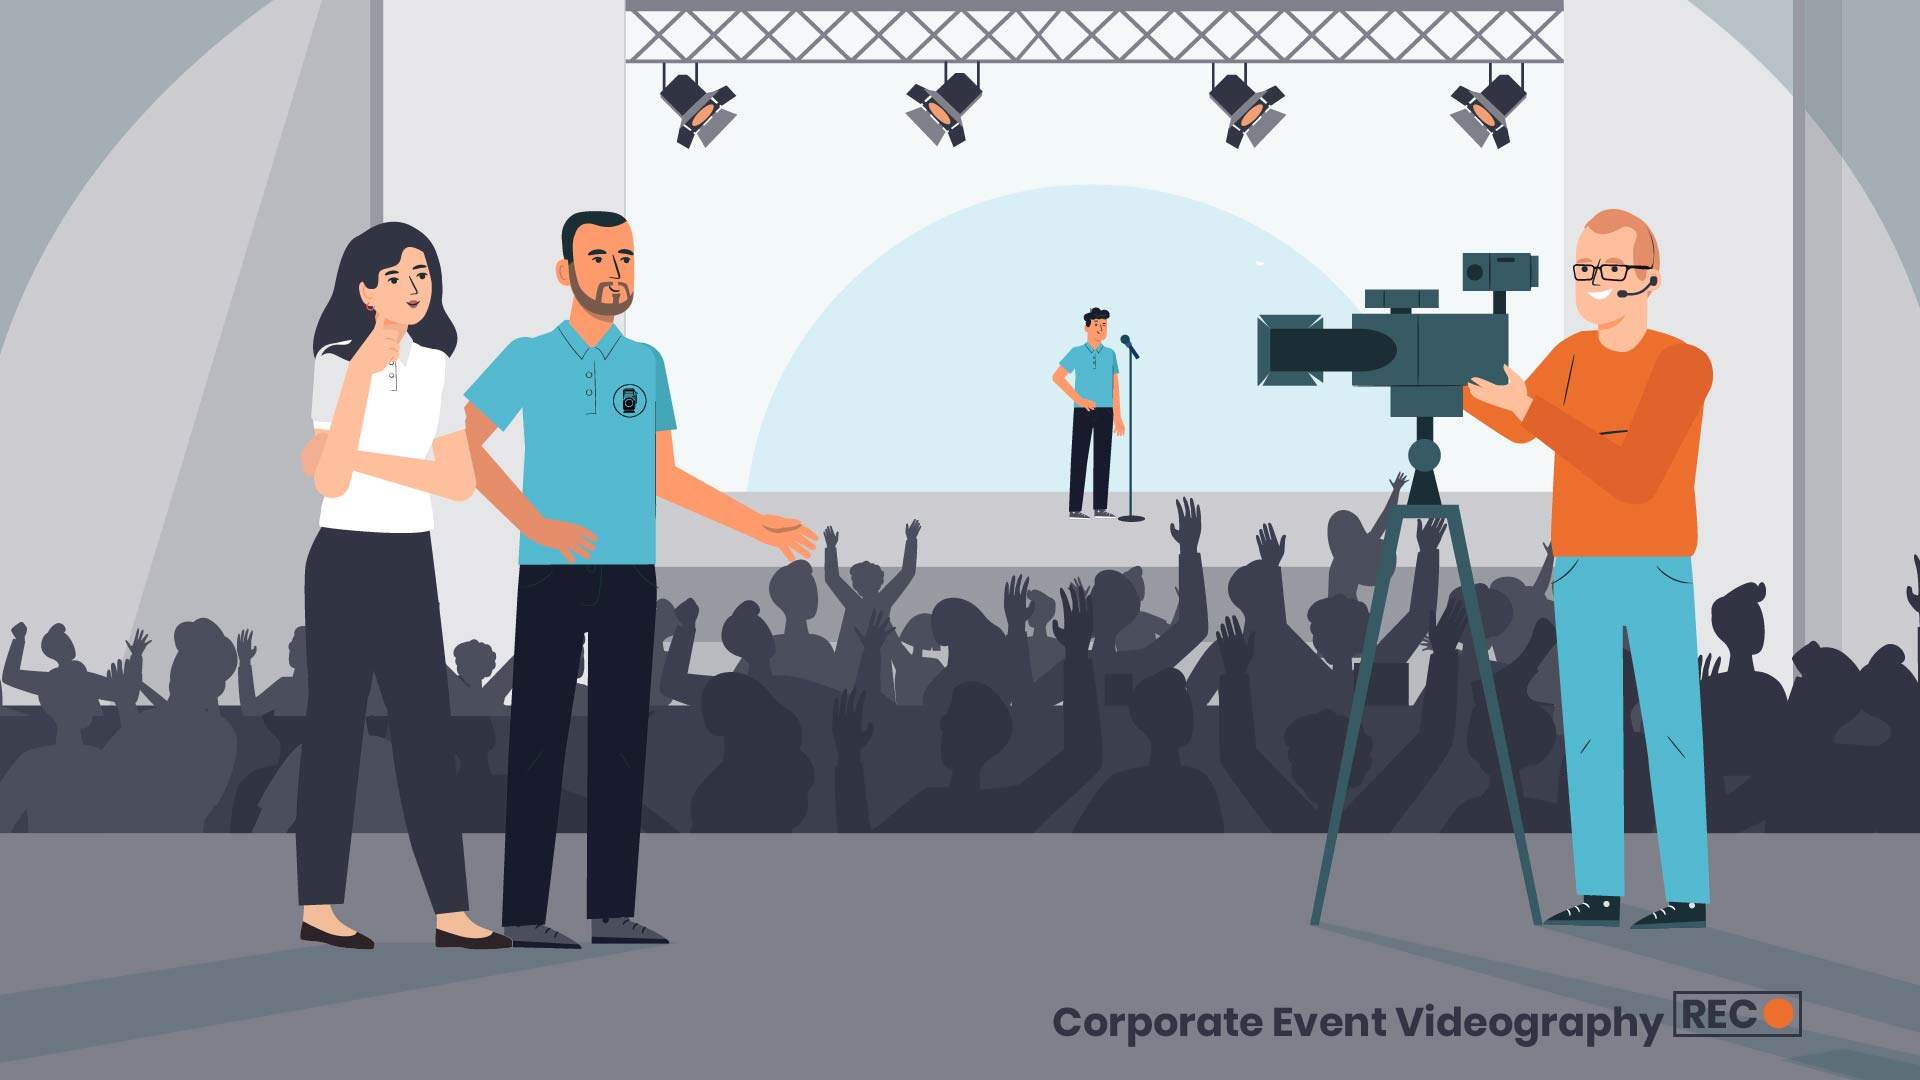 Event video - 2D animated video about professional shooting of events